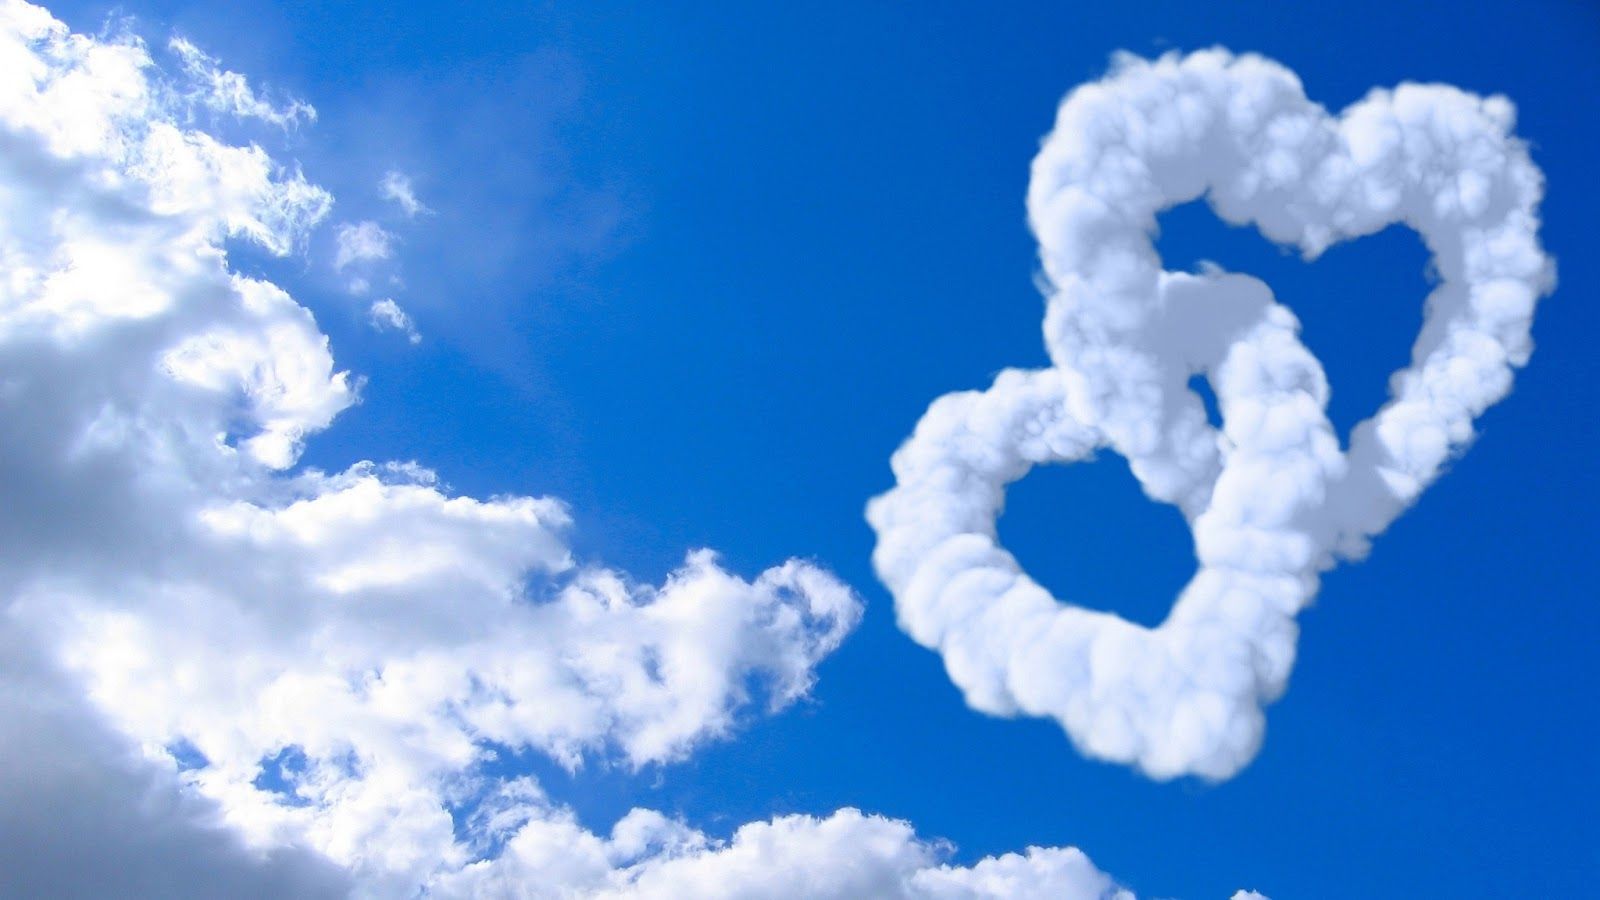 3D+Love+With+Clouds+Wallpaper+(10).jpg